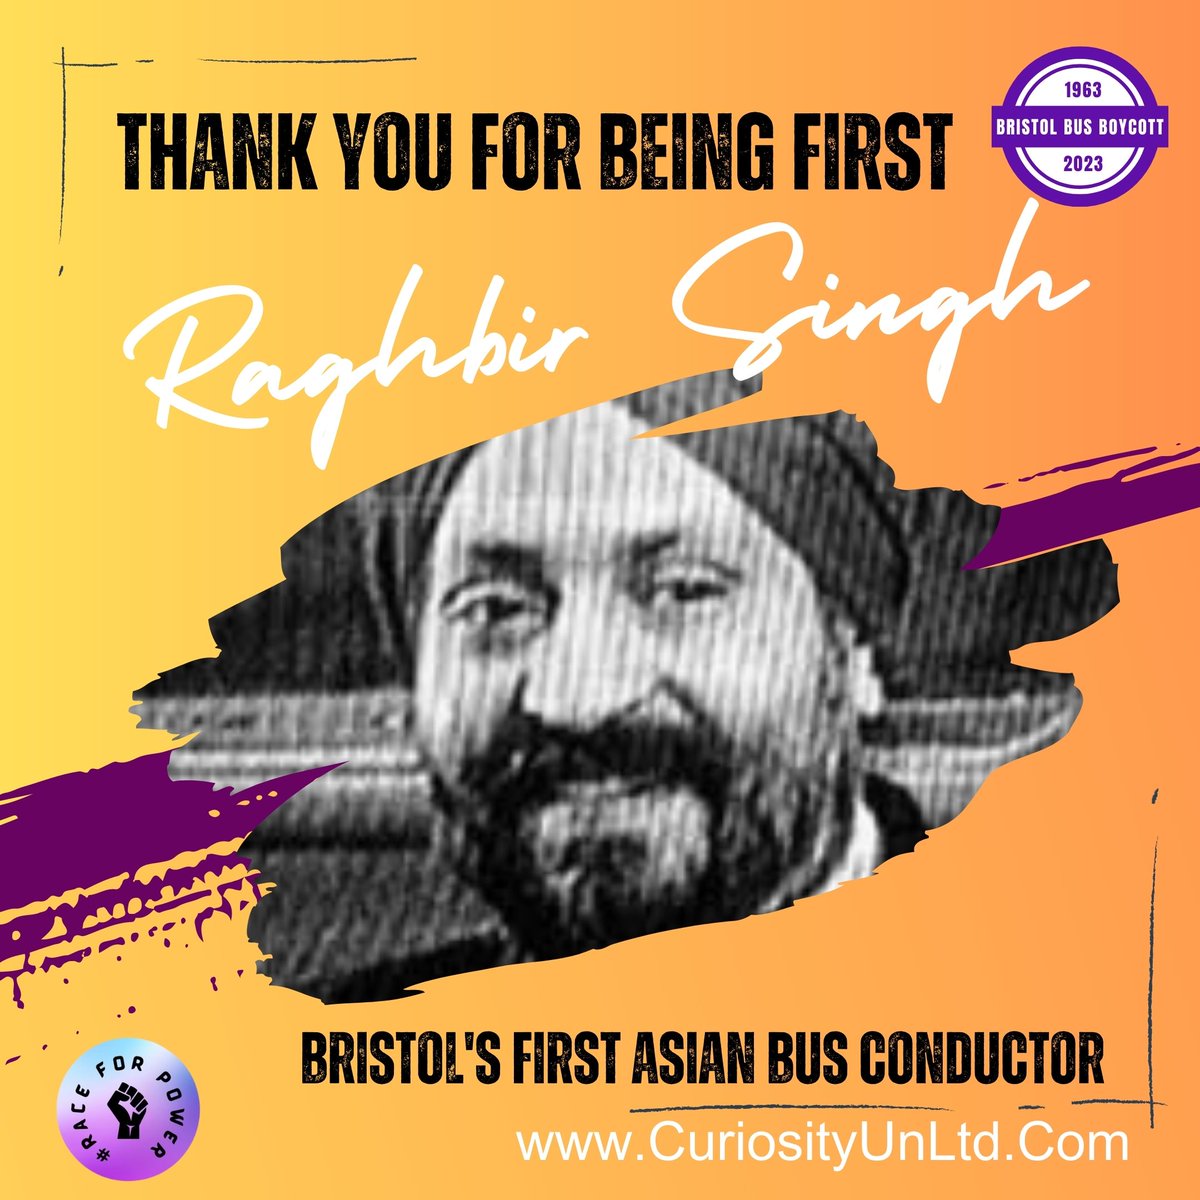 On Aug 28th 1963, the #BristolBusBoycott defeated the colour bar, 3 weeks later, on Sept 17th Raghbir Singh became the first #Asian bus conductor. So today, on the 60th anniversary, we salute you for #SteppingUp and for being a #Trailblazer.